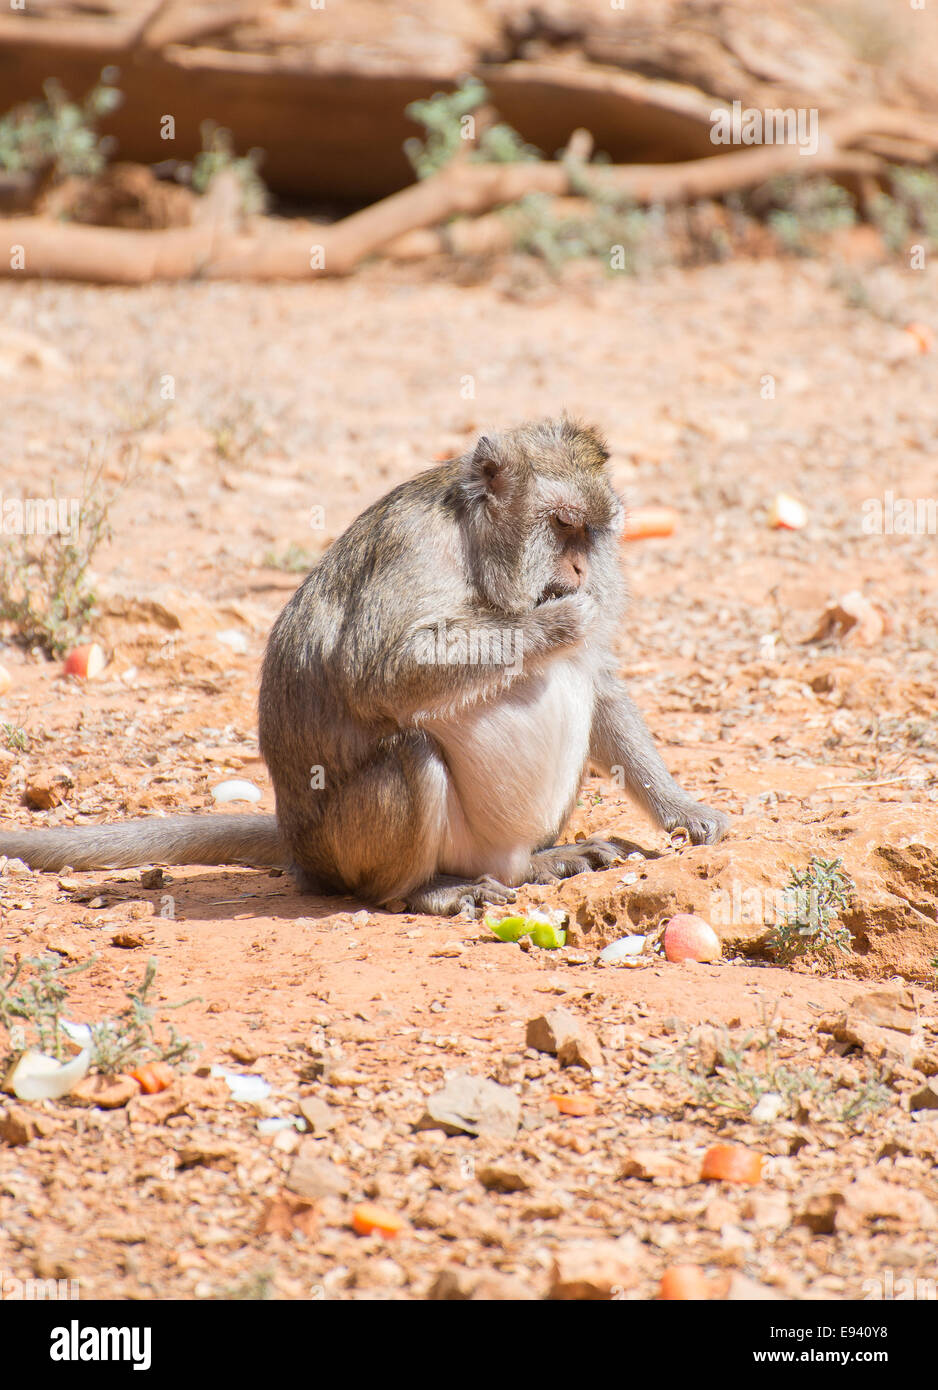 Fat monkey eating in national park. Stock Photo